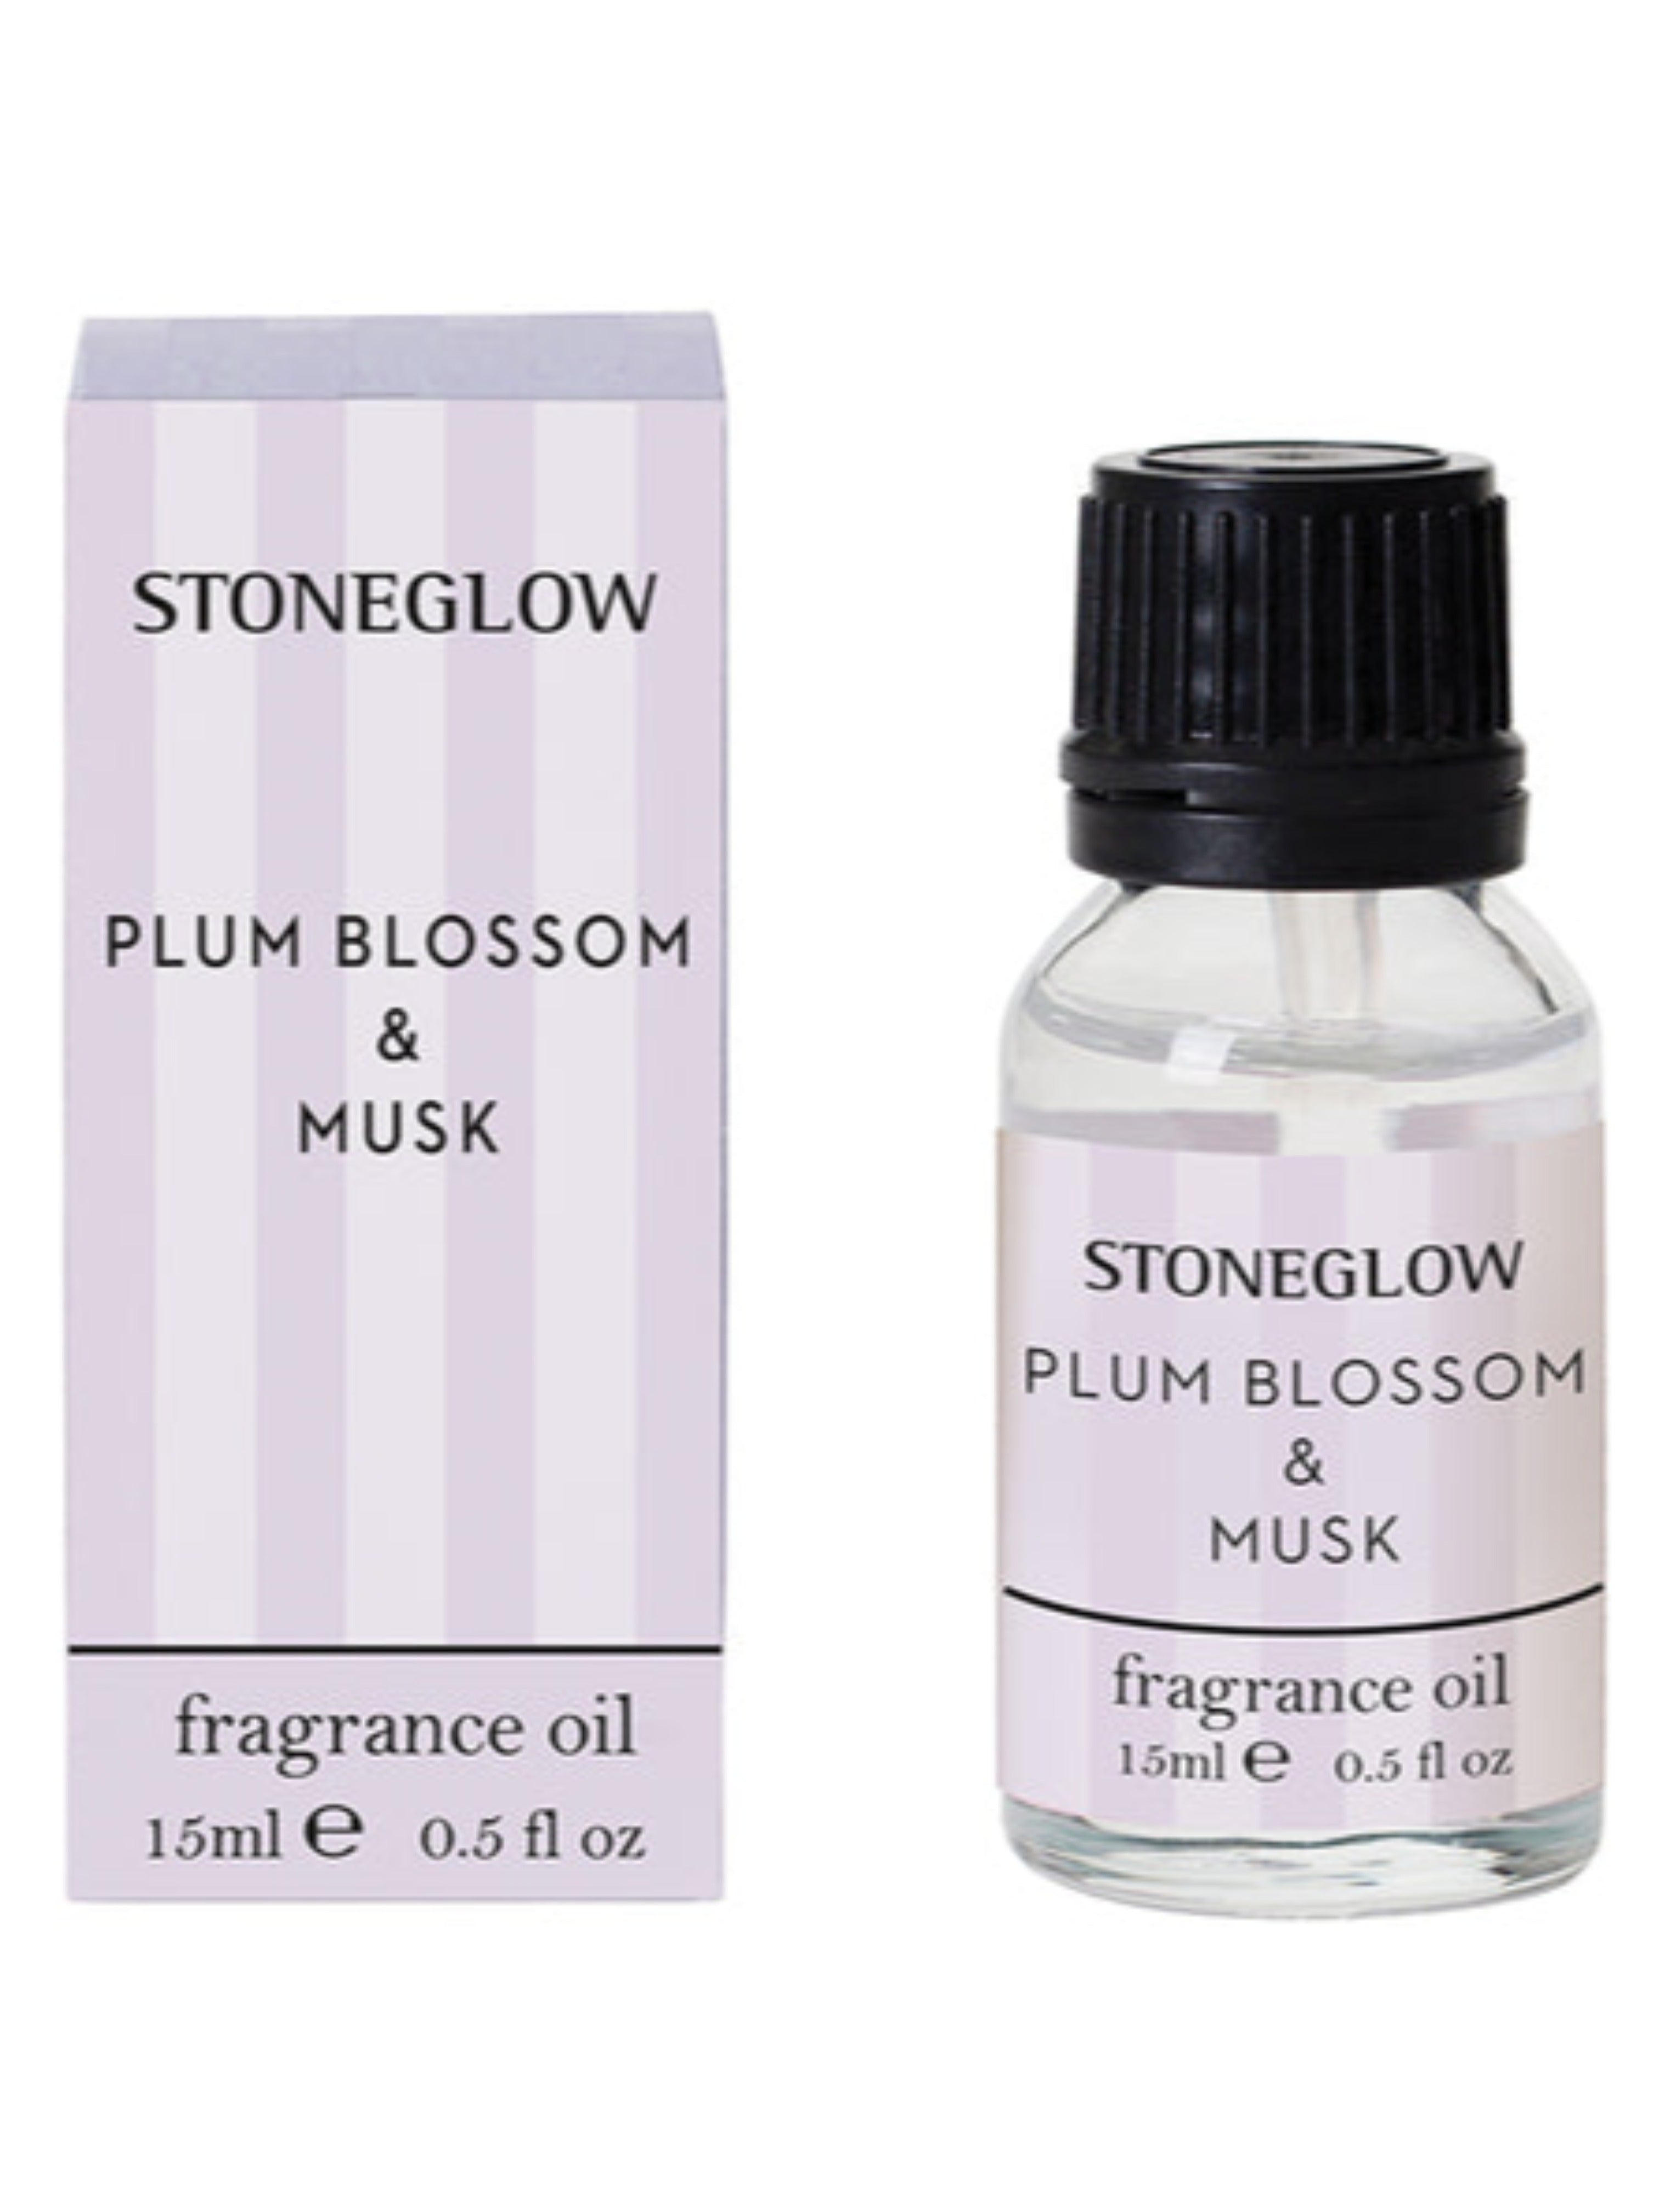 Stoneglow Plum Blossom and Musk Fragrance Oil